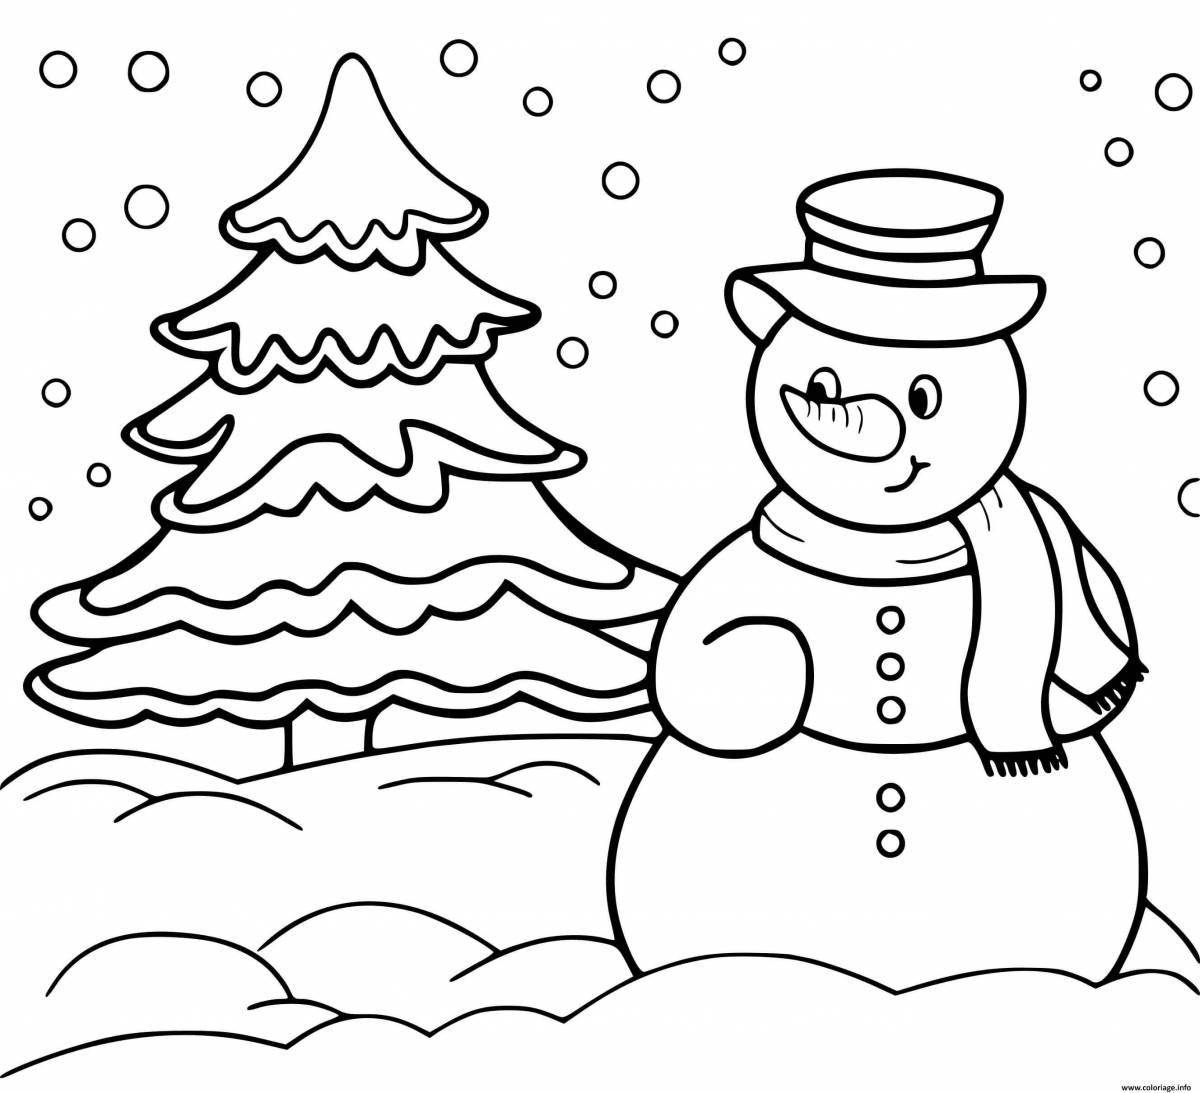 Great coloring book for children 2-3 years old for kindergarten in winter